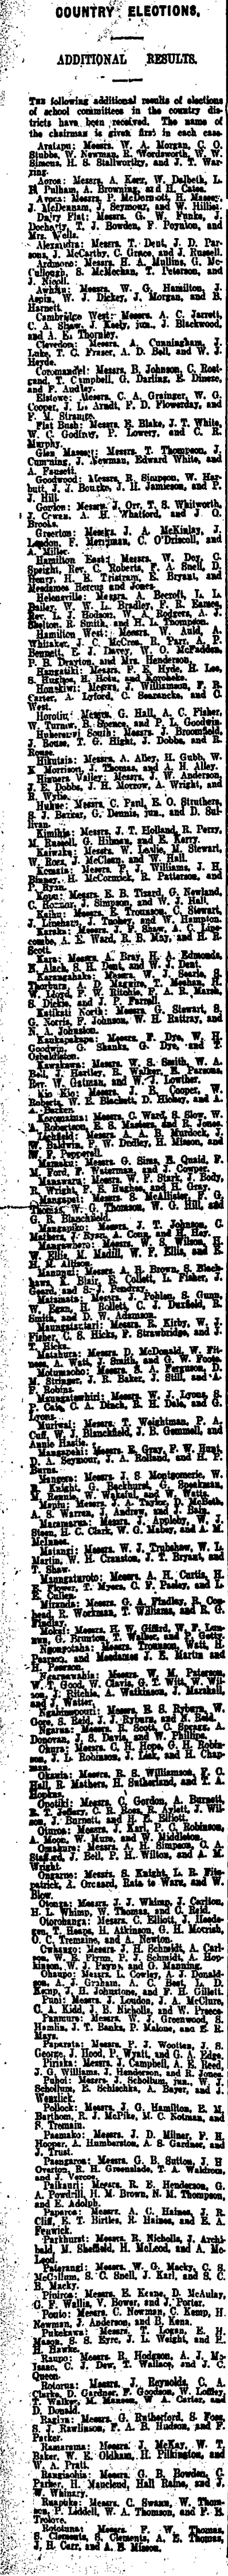 Papers Past Newspapers New Zealand Herald 25 April 1916 School Committees